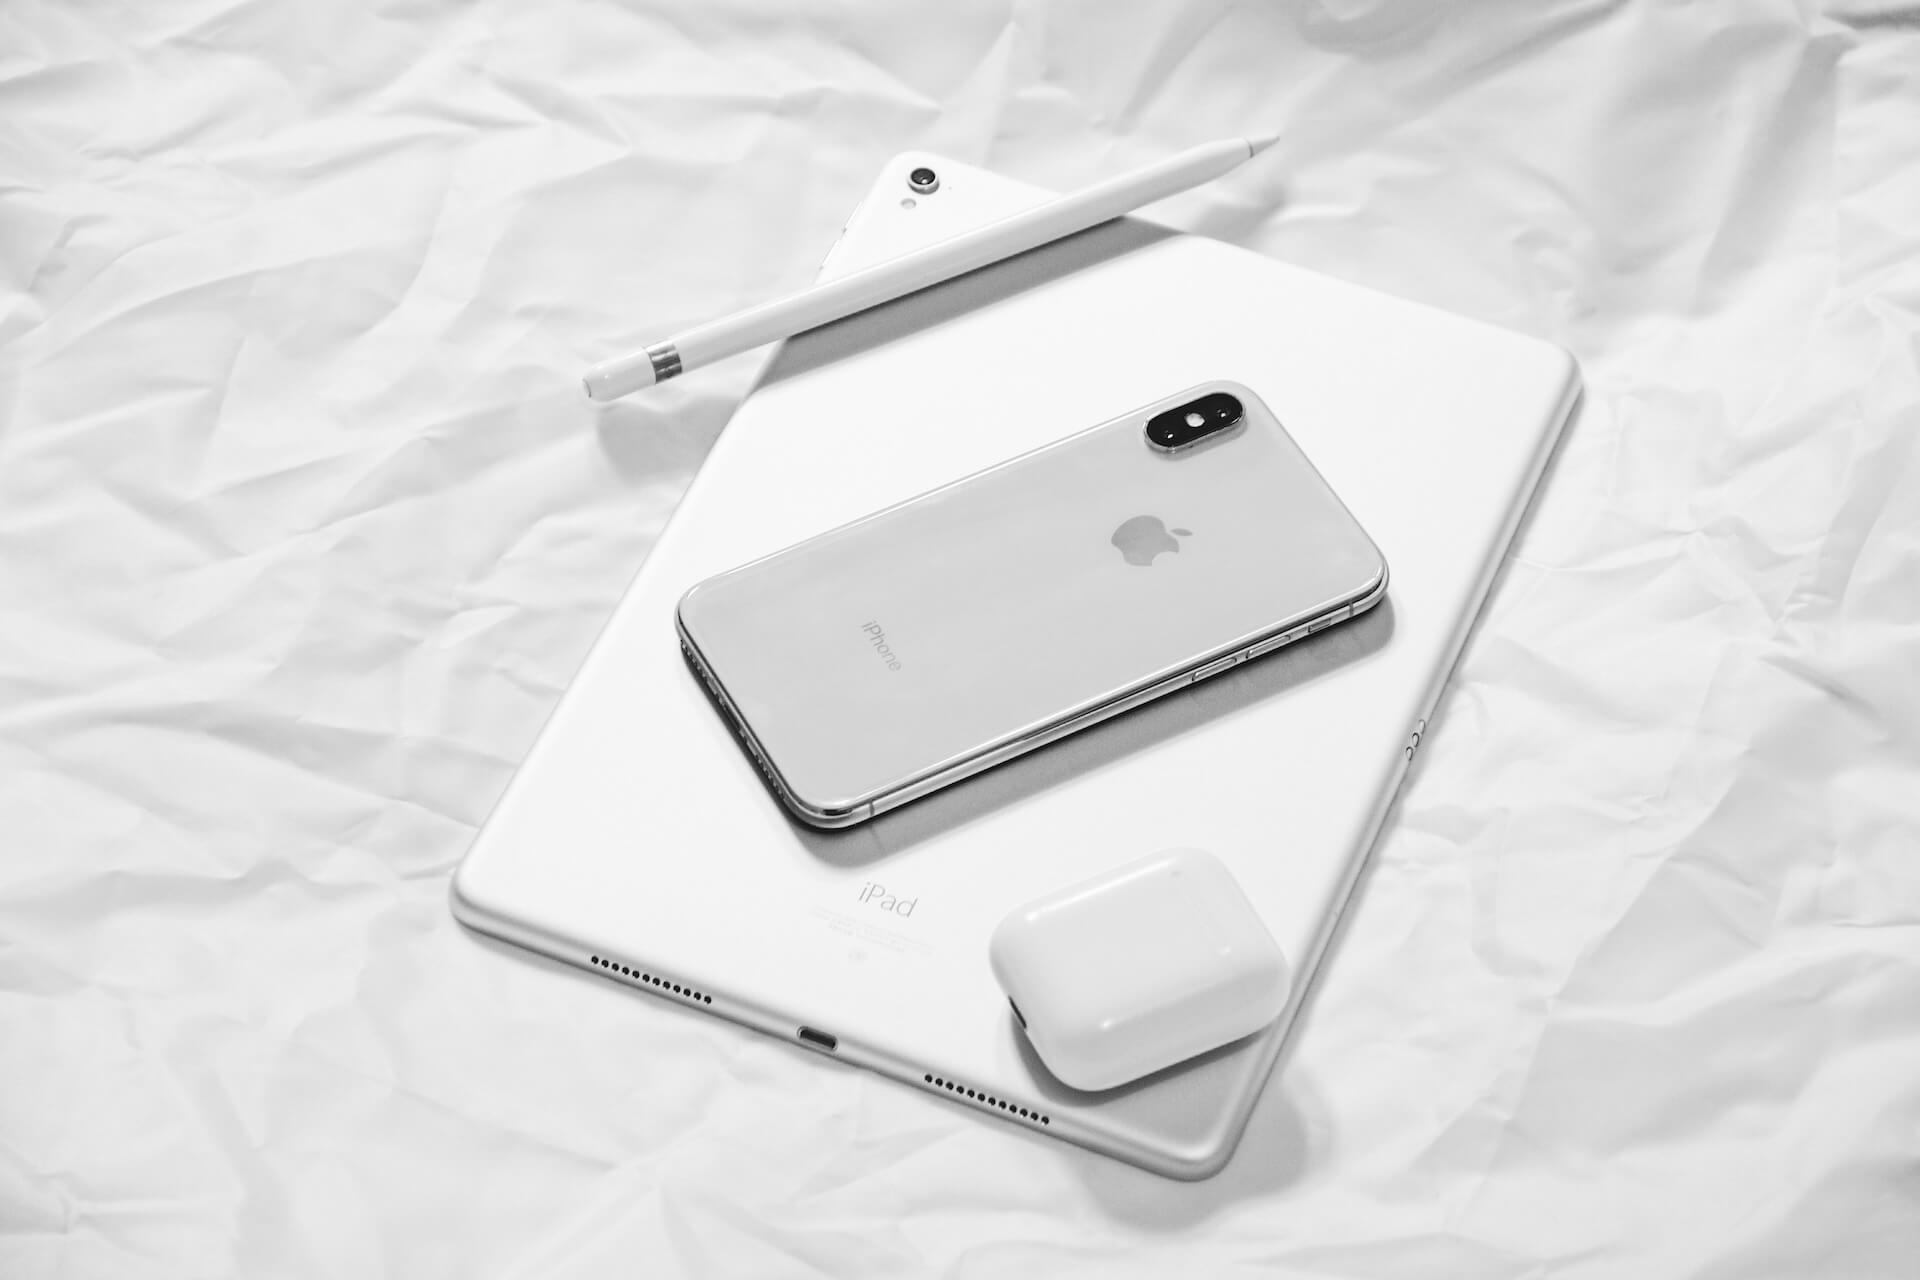 iPhone, iPad, and AirPods on a white surface